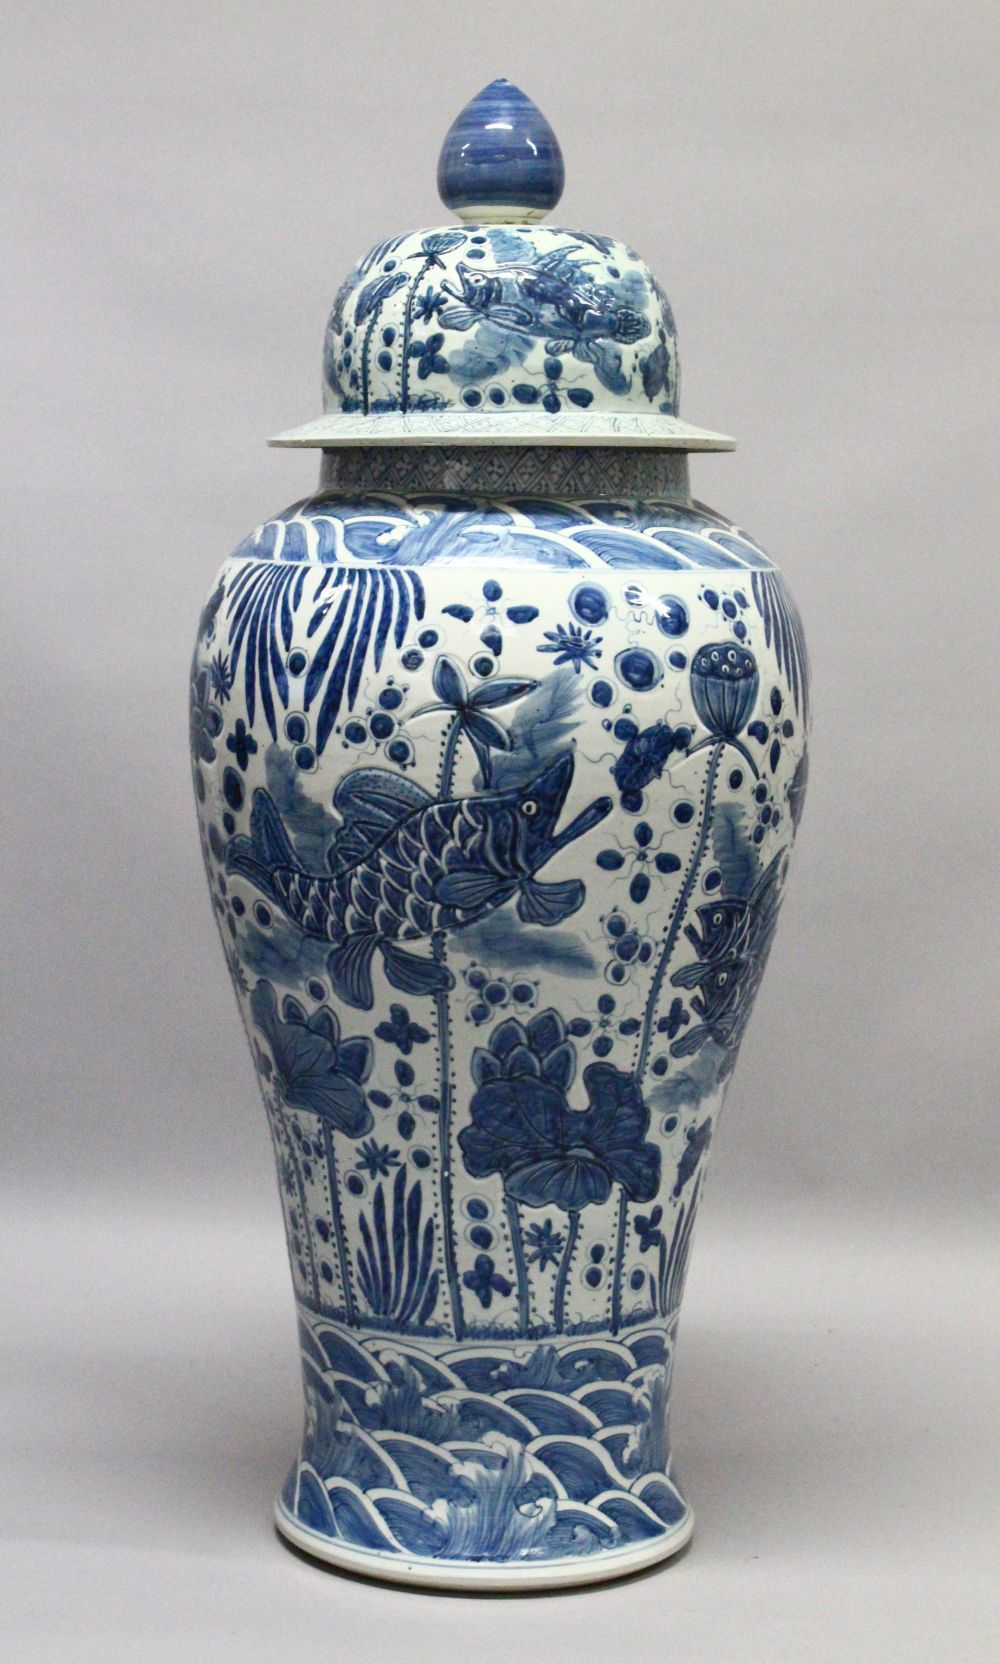 A LARGE 20TH CENTURY KANGXI STYLE BLUE AND WHITE FLOOR STANDING VASE AND COVER, the body painted